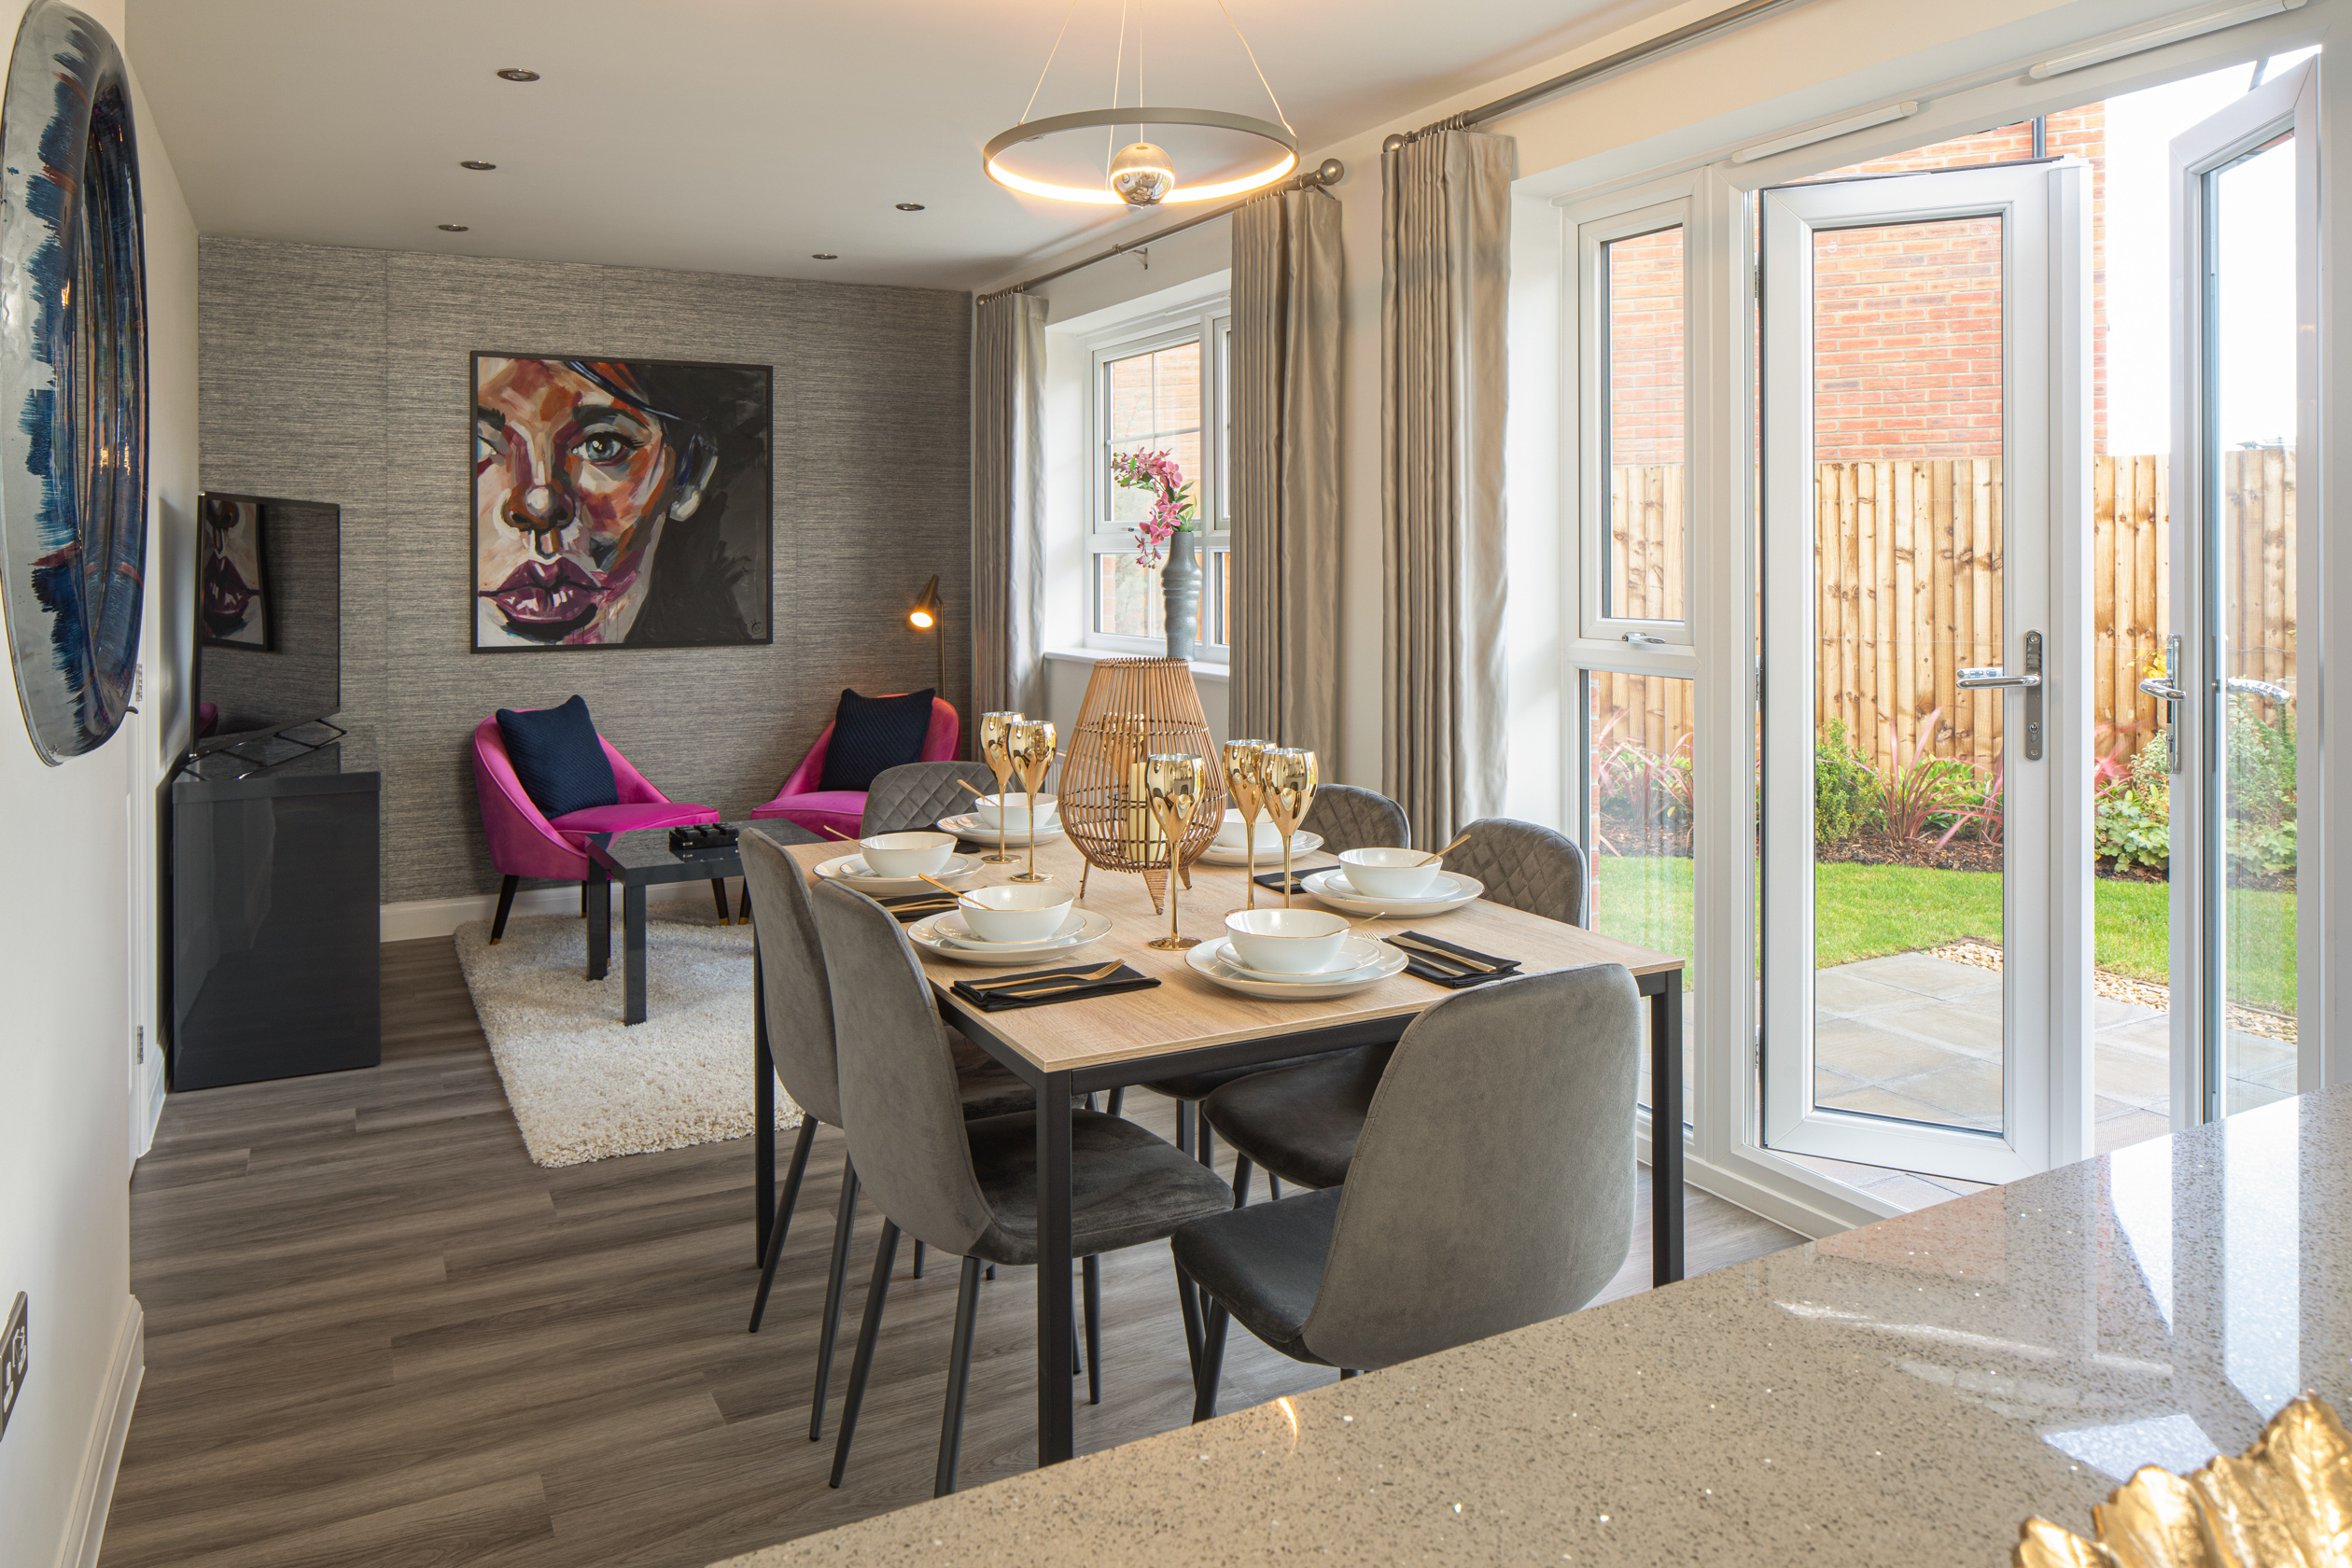 Property 3 of 10. Dining Area In The Radleigh 4 Bedroom Home